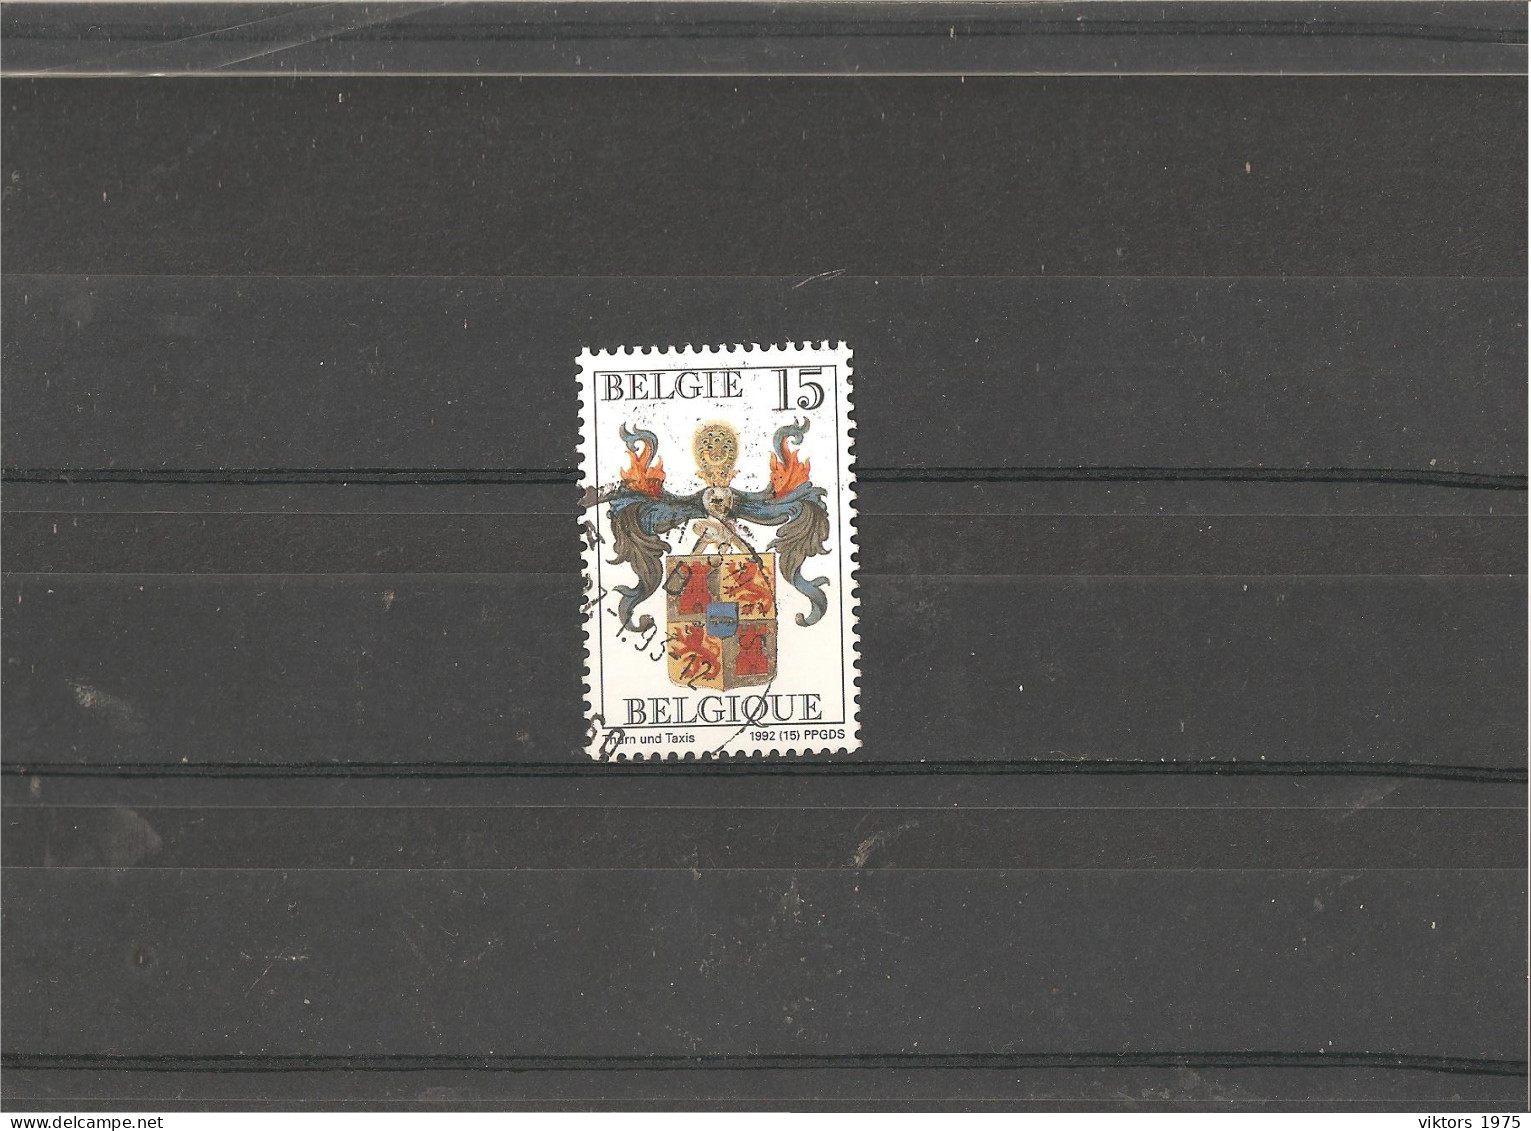 Used Stamp Nr.2535 In MICHEL Catalog - Used Stamps